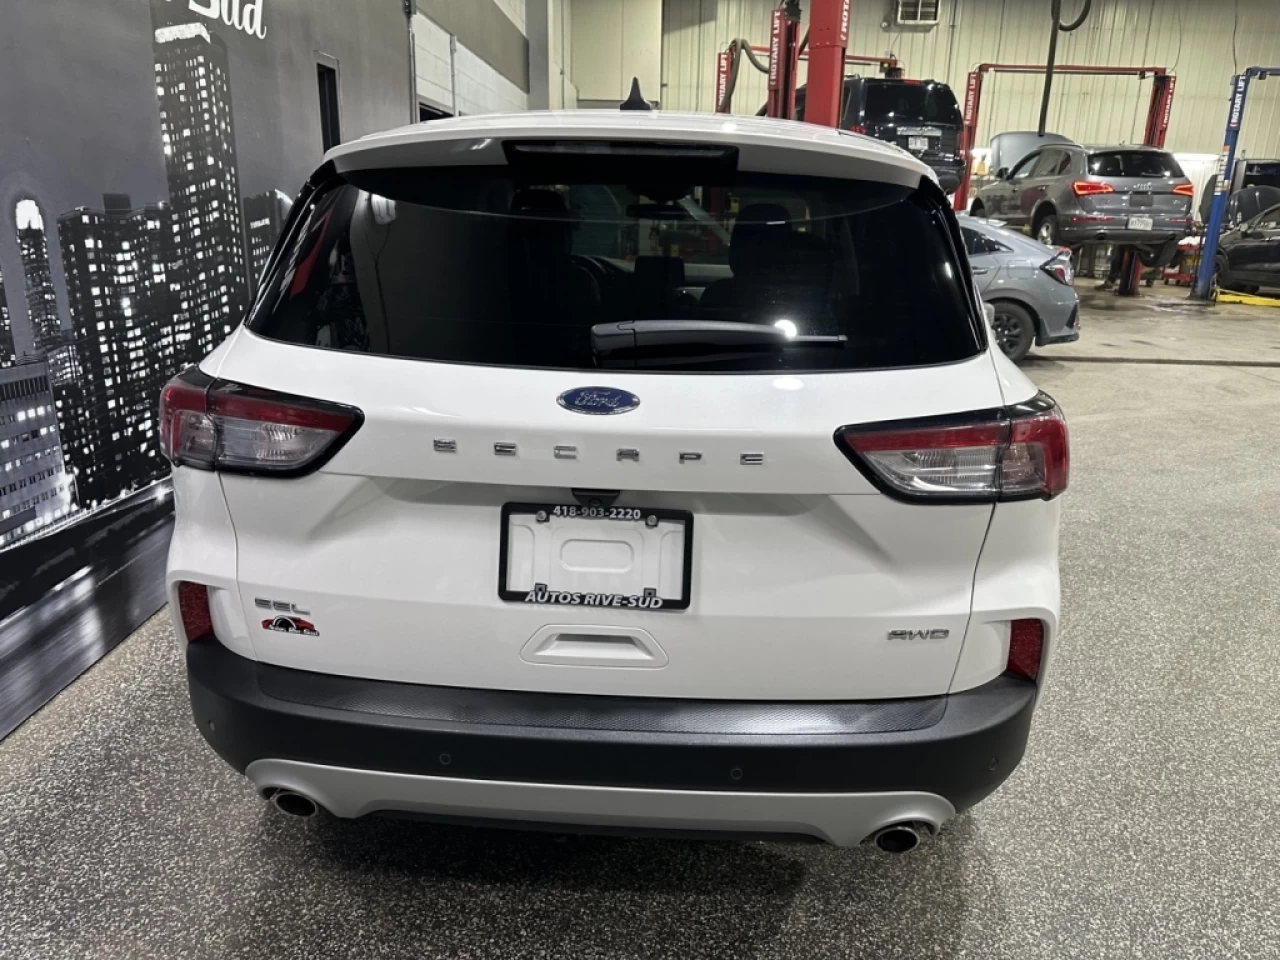 2022 Ford Escape SEL AWD FULL CUIR GPS SEULEMENT 43 700KM Image principale